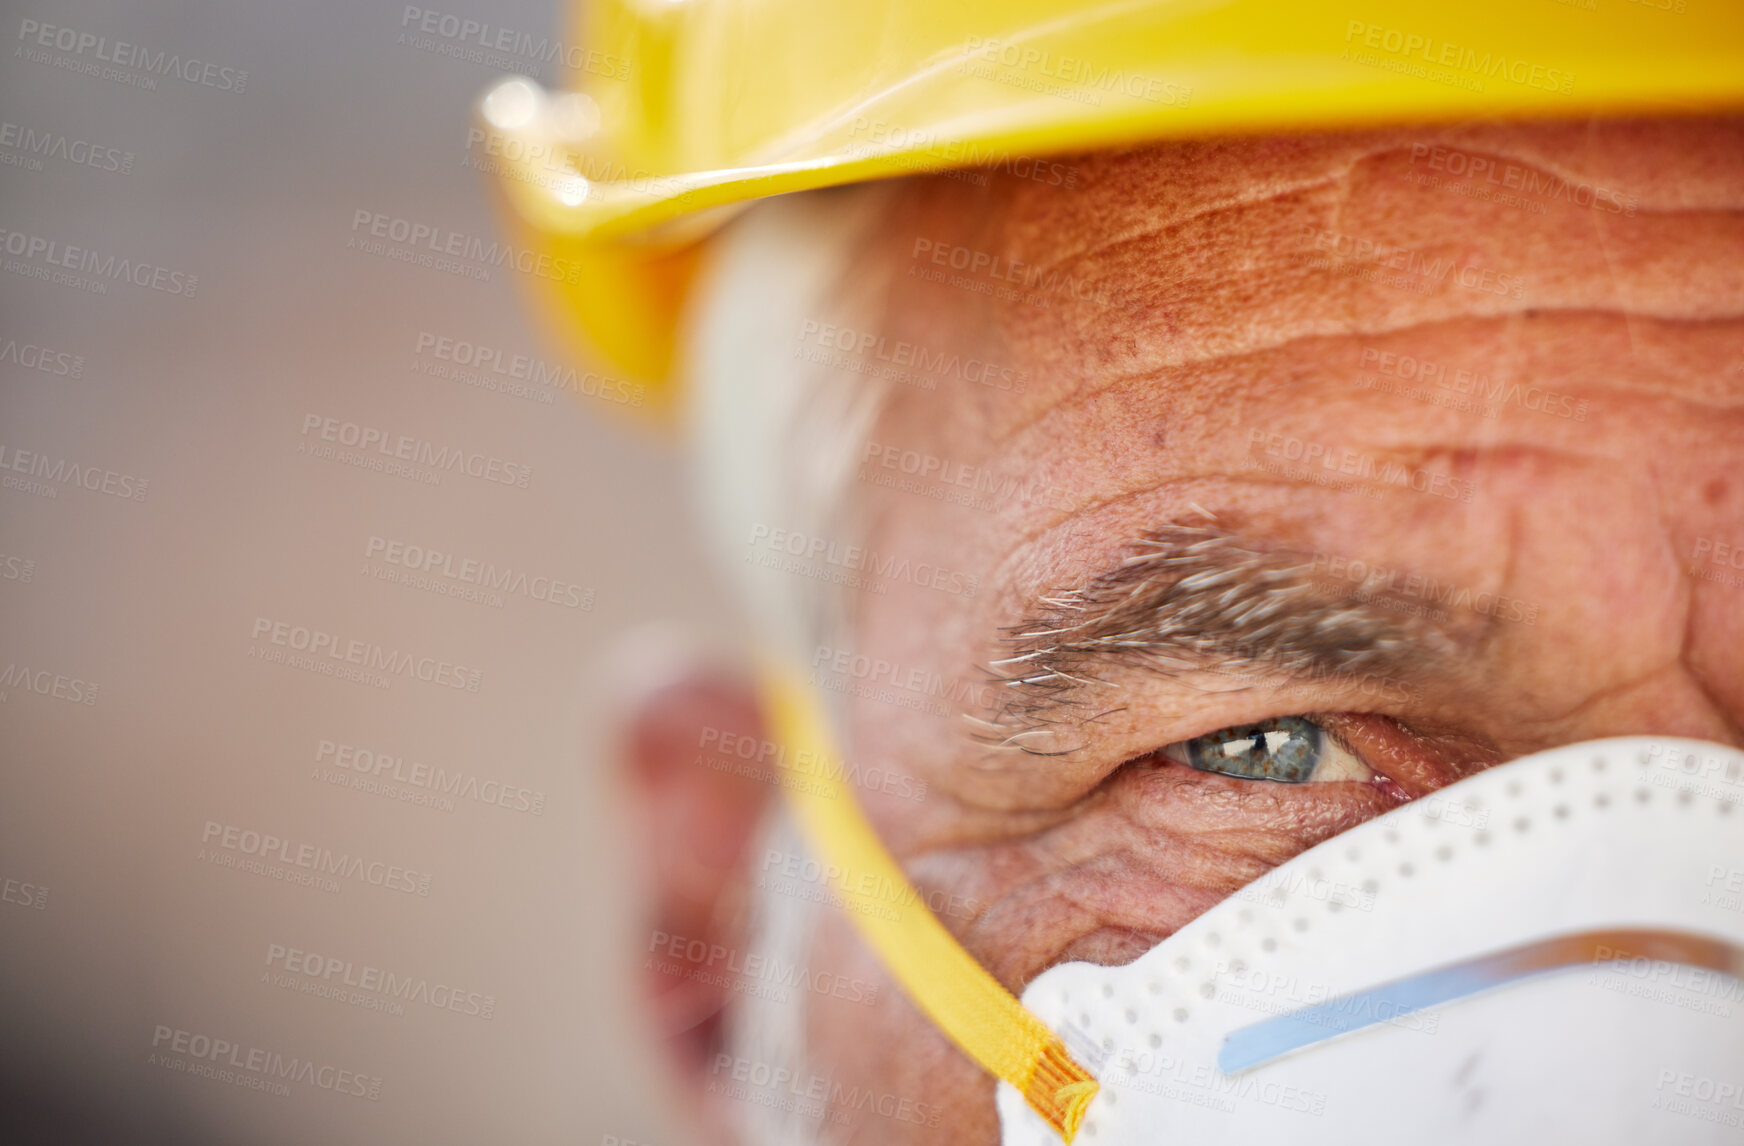 Buy stock photo Cropped shot of a senior man wearing a hard hat and mask